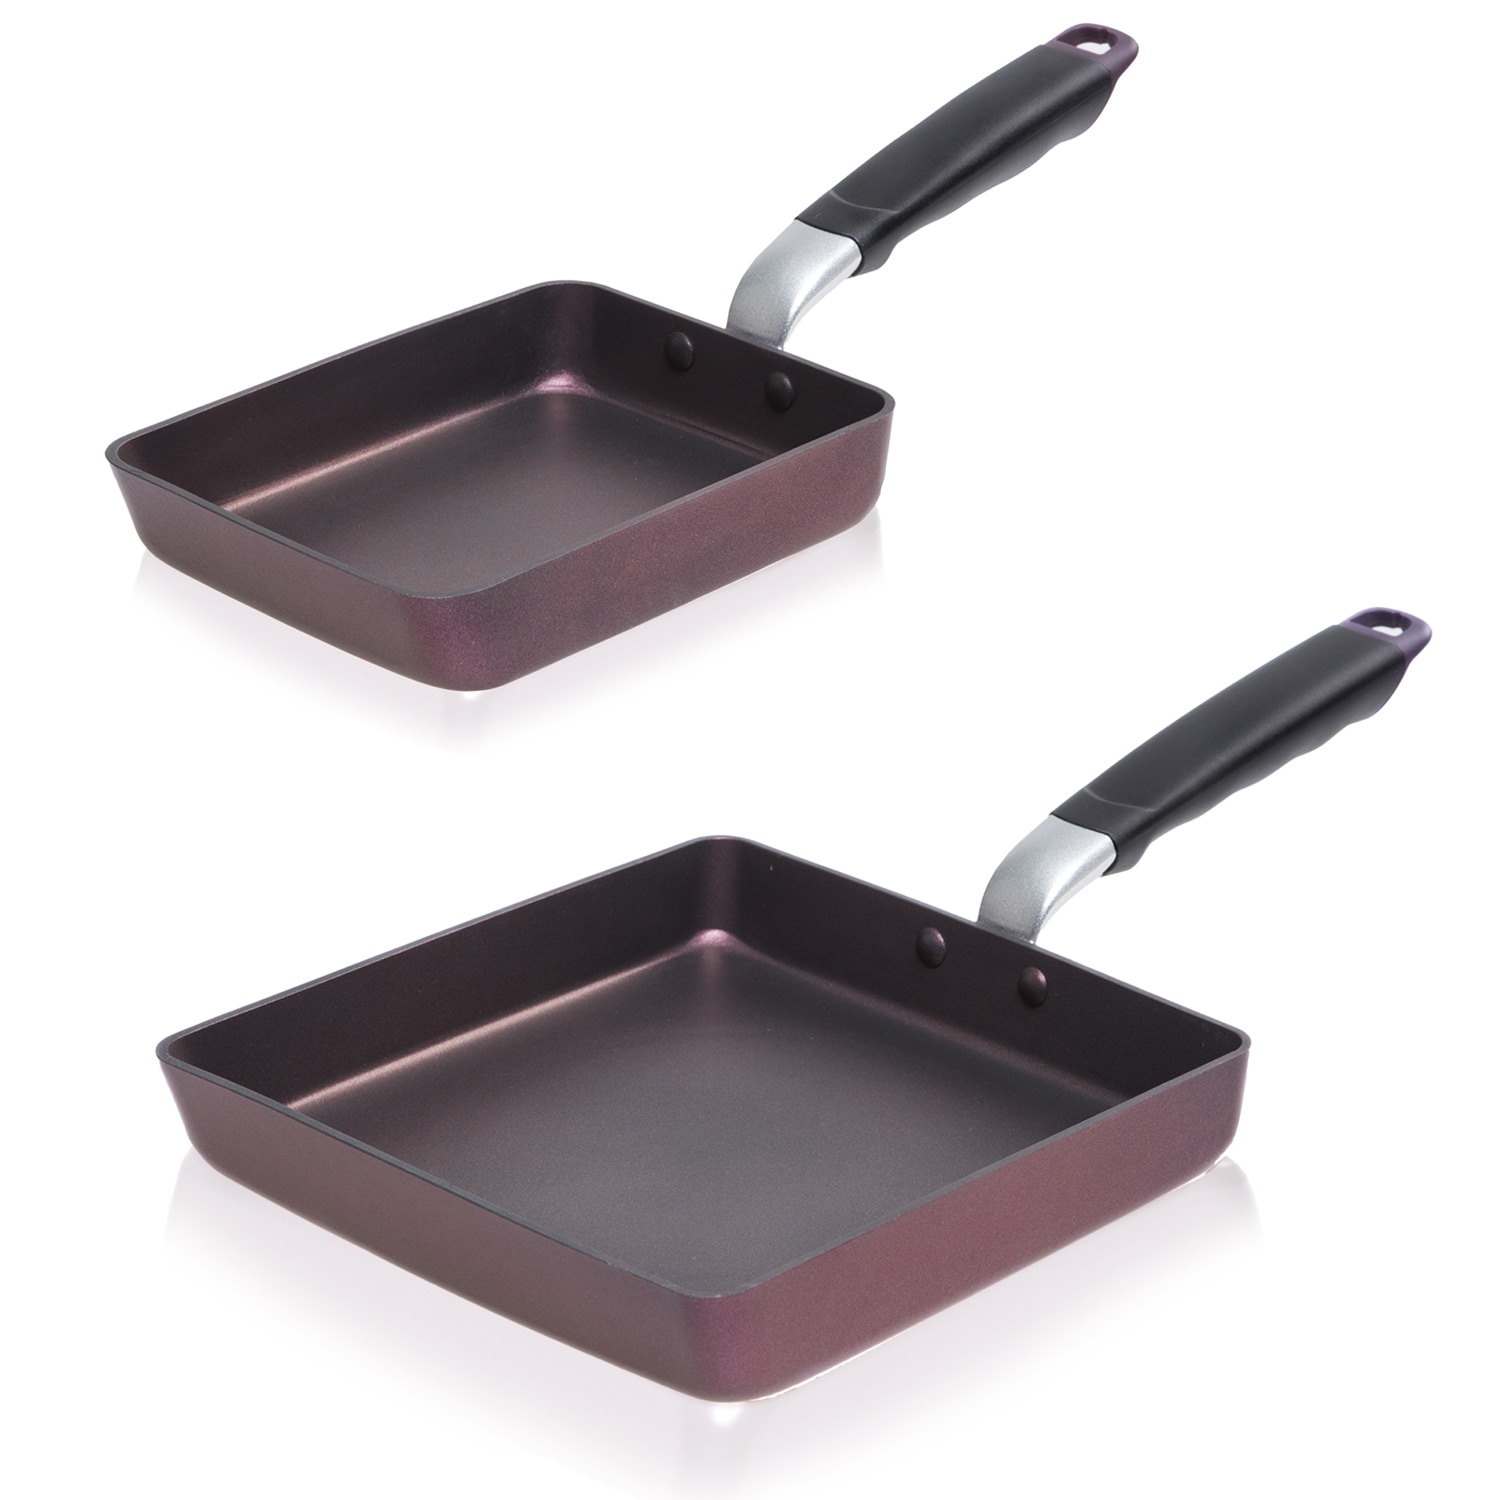 Techef - Frittata and Omelette Pan, Coated with New Teflon Select/Non-stick Coat